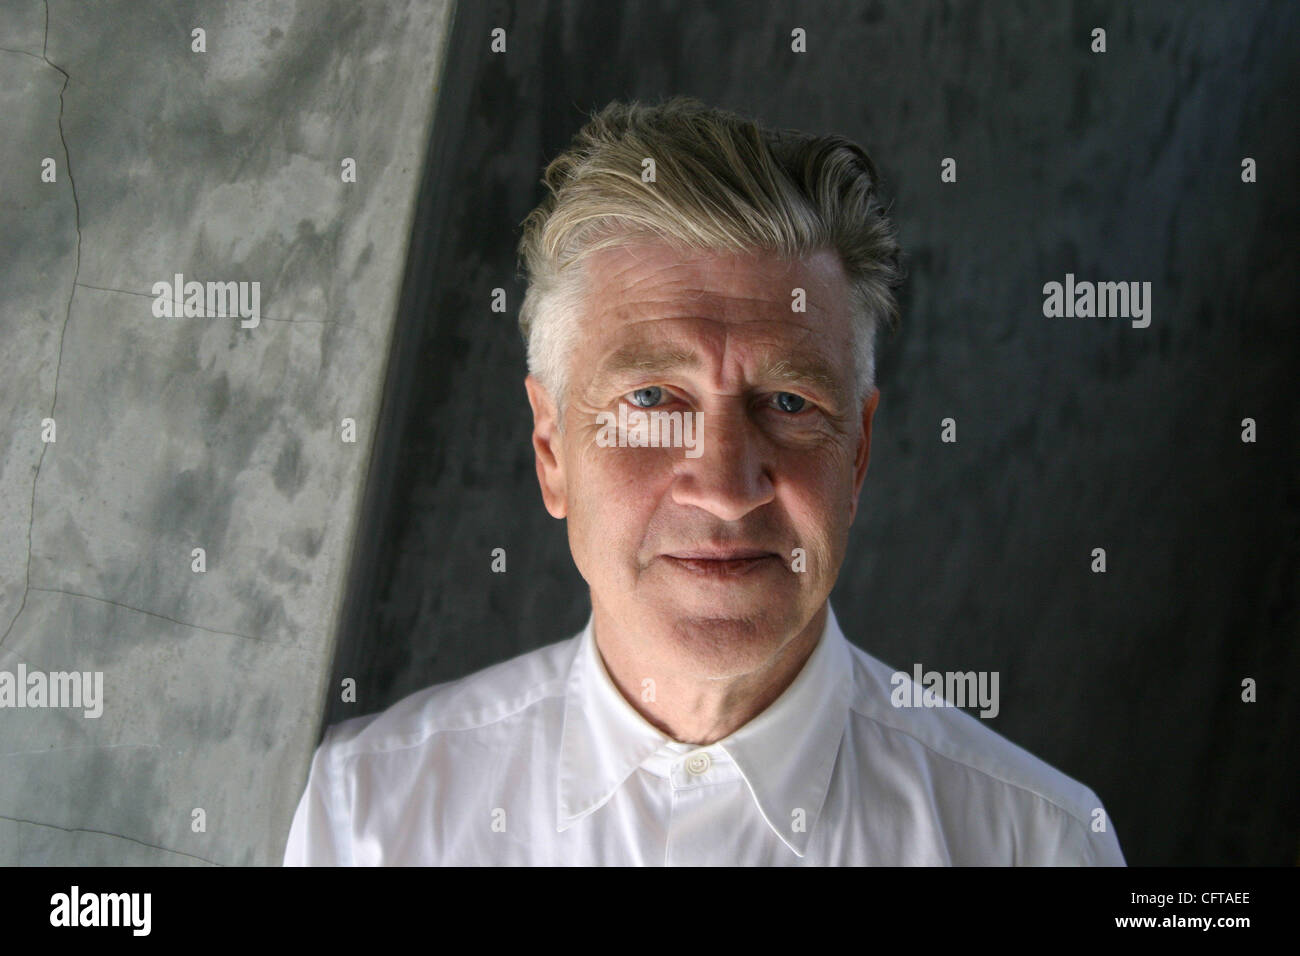 Dec 22, 2006; Los Angeles, CA, USA; Filmaker David Lynch at his Hollywood Hills compound . Lynch's films are known for their elements of surrealism, their nightmarish and dreamlike sequences, their stark and strange images, and their meticulously crafted audio. His Films include Blue Velvet, Twin Pe Stock Photo